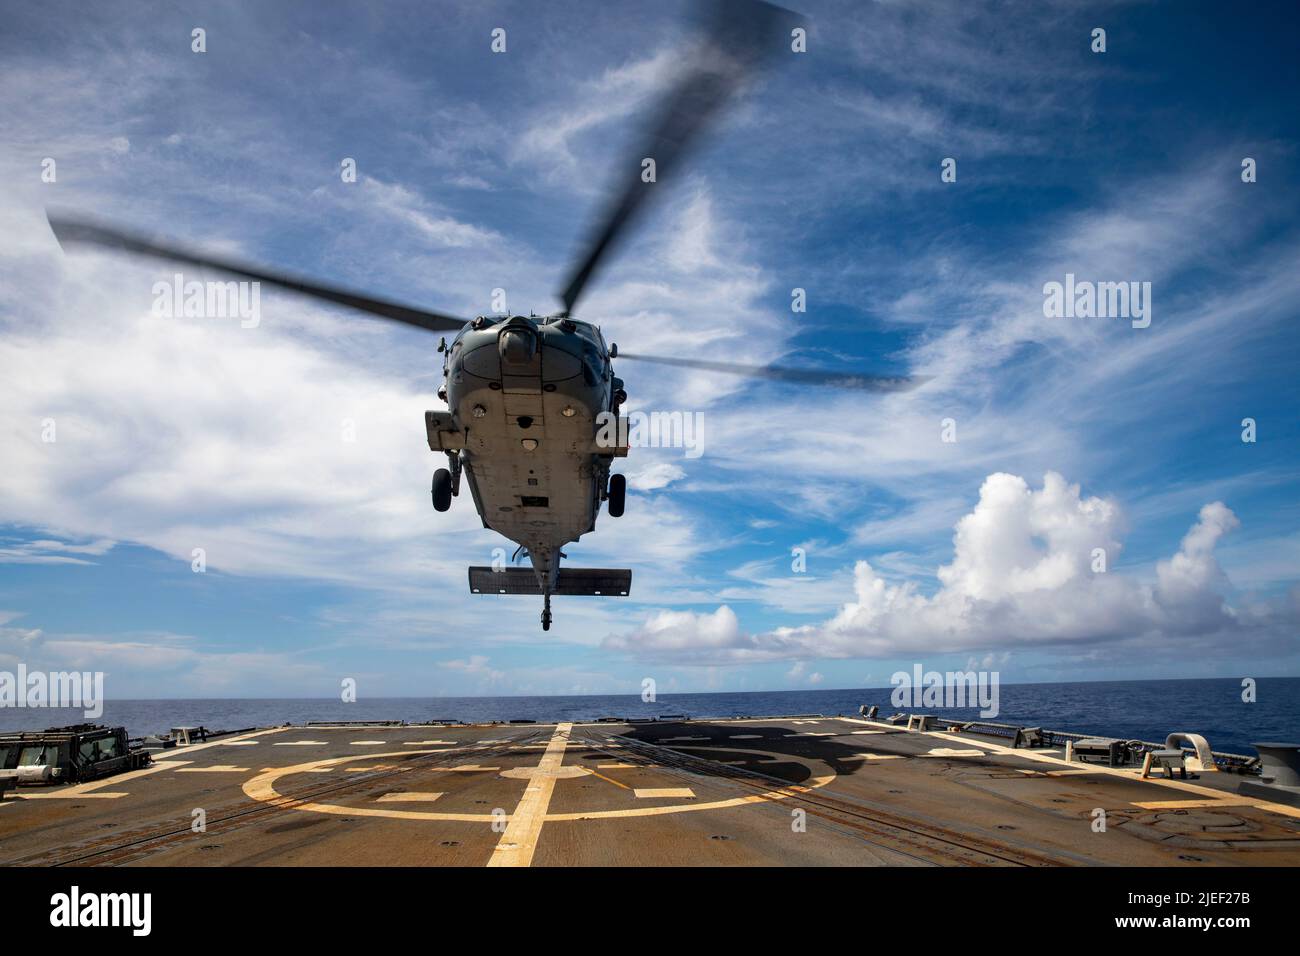 PHILIPPINE SEA (June 2, 2022) An MH-60S Sea Hawk helicopter, assigned to the “Chargers” of Helicopter Sea Combat Squadron (HSC) 14, prepares to land on the flight deck of the Arleigh Burke-class guided-missile destroyer USS Dewey (DDG 105) during a vertical replenishment with Ticonderoga-class guided-missile cruiser USS Mobile Bay (CG 53). Abraham Lincoln Strike Group is on a scheduled deployment in the U.S. 7th Fleet area of operations to enhance interoperability through alliances and partnerships while serving as a ready-response force in support of a free and open Indo-Pacific region. (U.S. Stock Photo